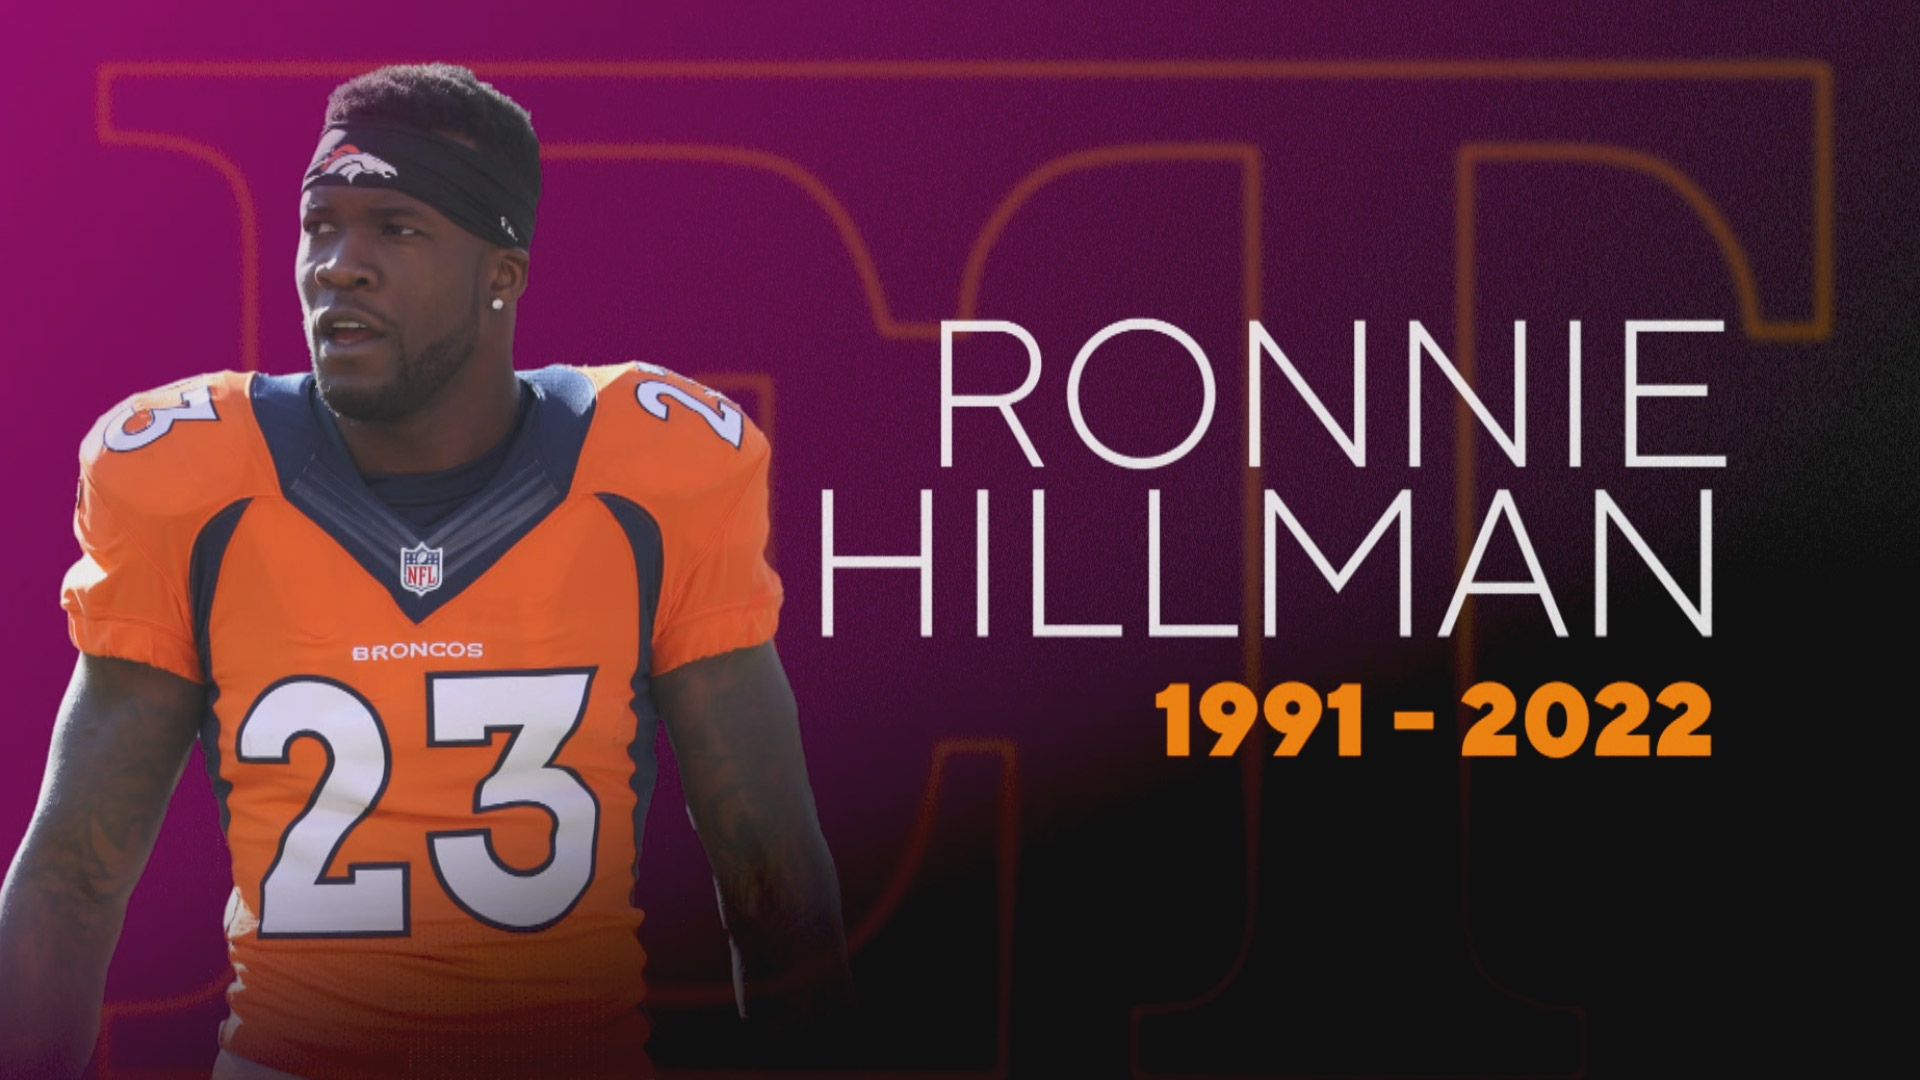 Former Broncos running back Ronnie Hillman in hospice with cancer